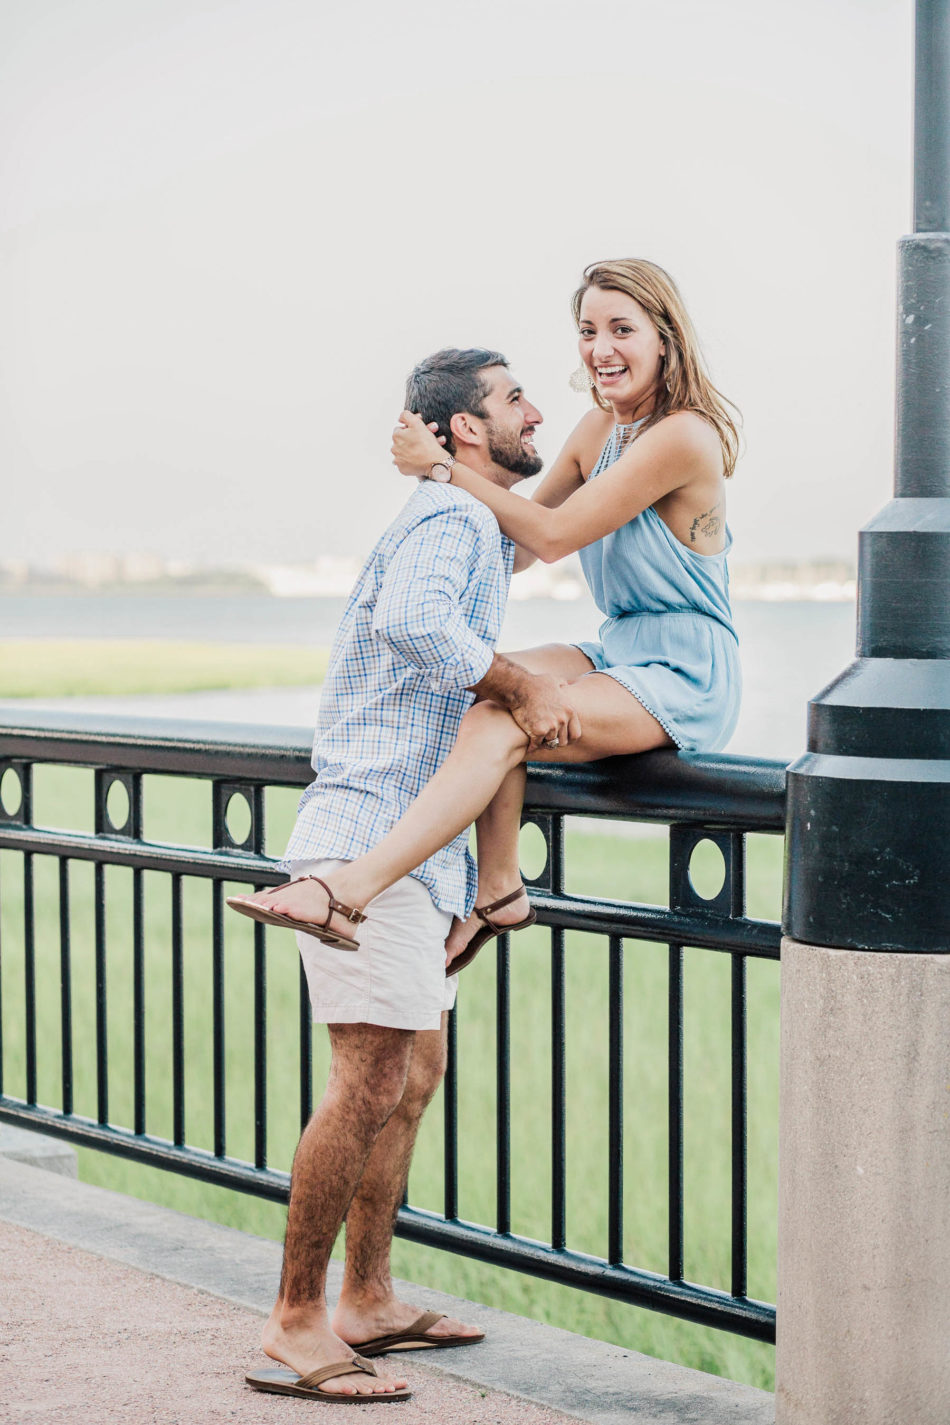 Engaged couple sit on railing with ocean behind them, Waterfront Park, Charleston, South Carolina Kate Timbers Photography. http://katetimbers.com #katetimbersphotography // Charleston Photography // Inspiration